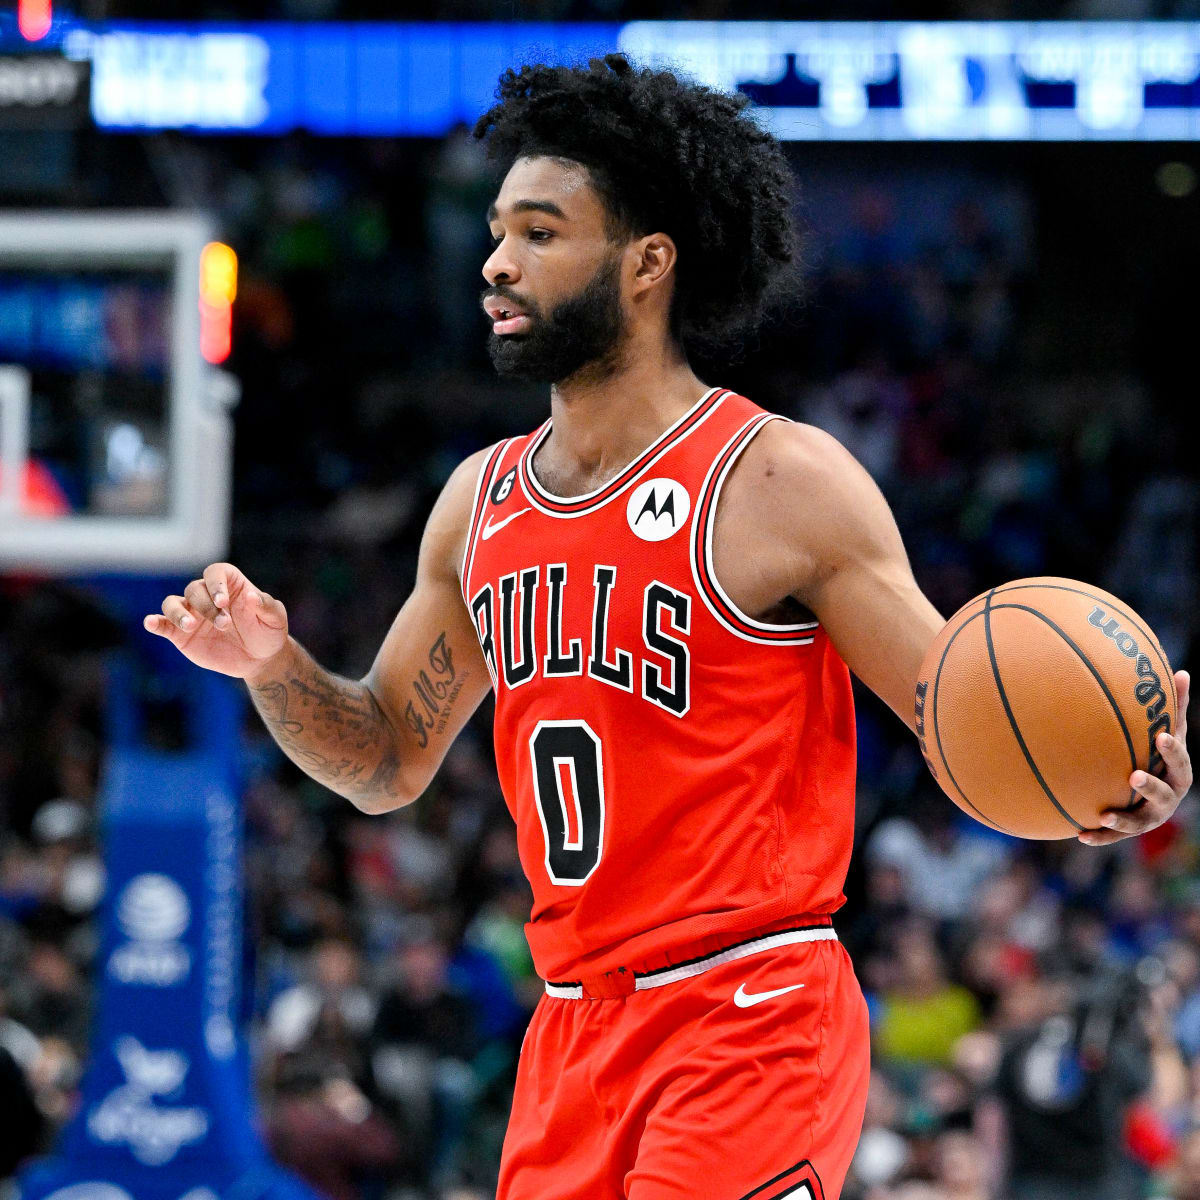 Coby White, San Antonio Spurs Rumors: Coby White to Part Ways With the Chicago Bulls as a Part of Their Rebuild